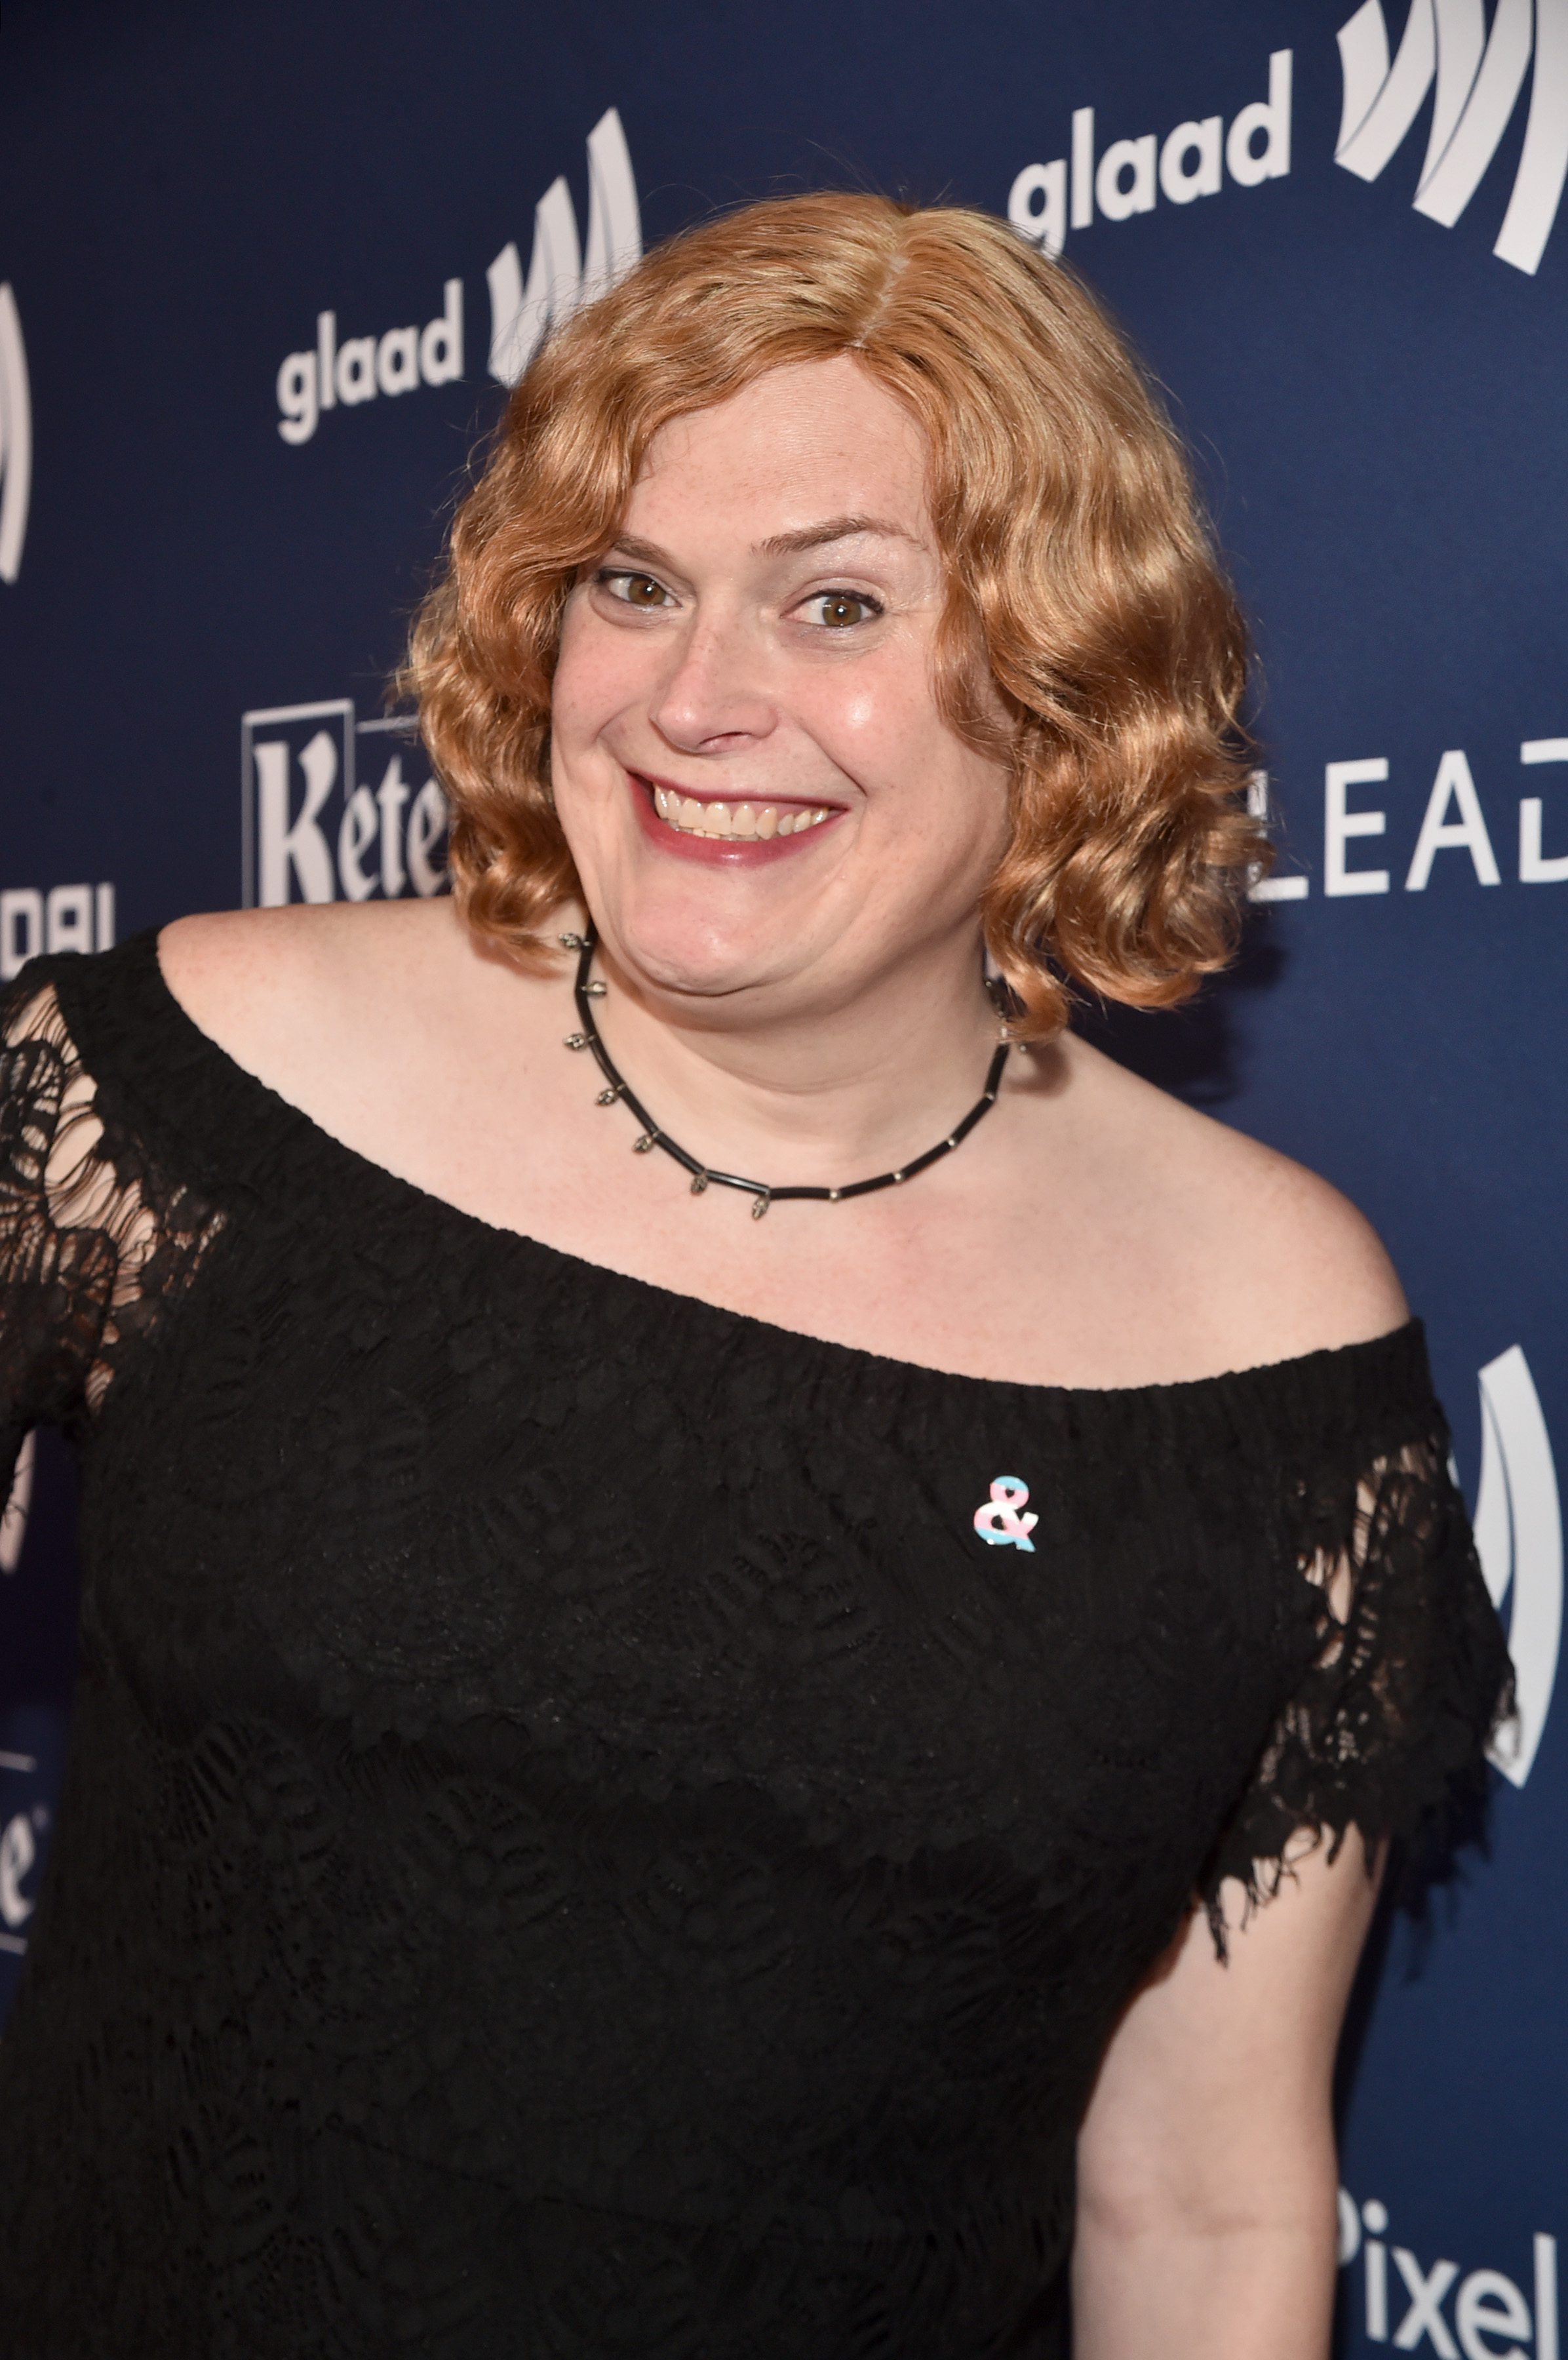 Lilly Wachowski attends The 33rd Annual GLAAD Media Awards on April 2, 2022 in Beverly Hills, California. | Source: Getty Images